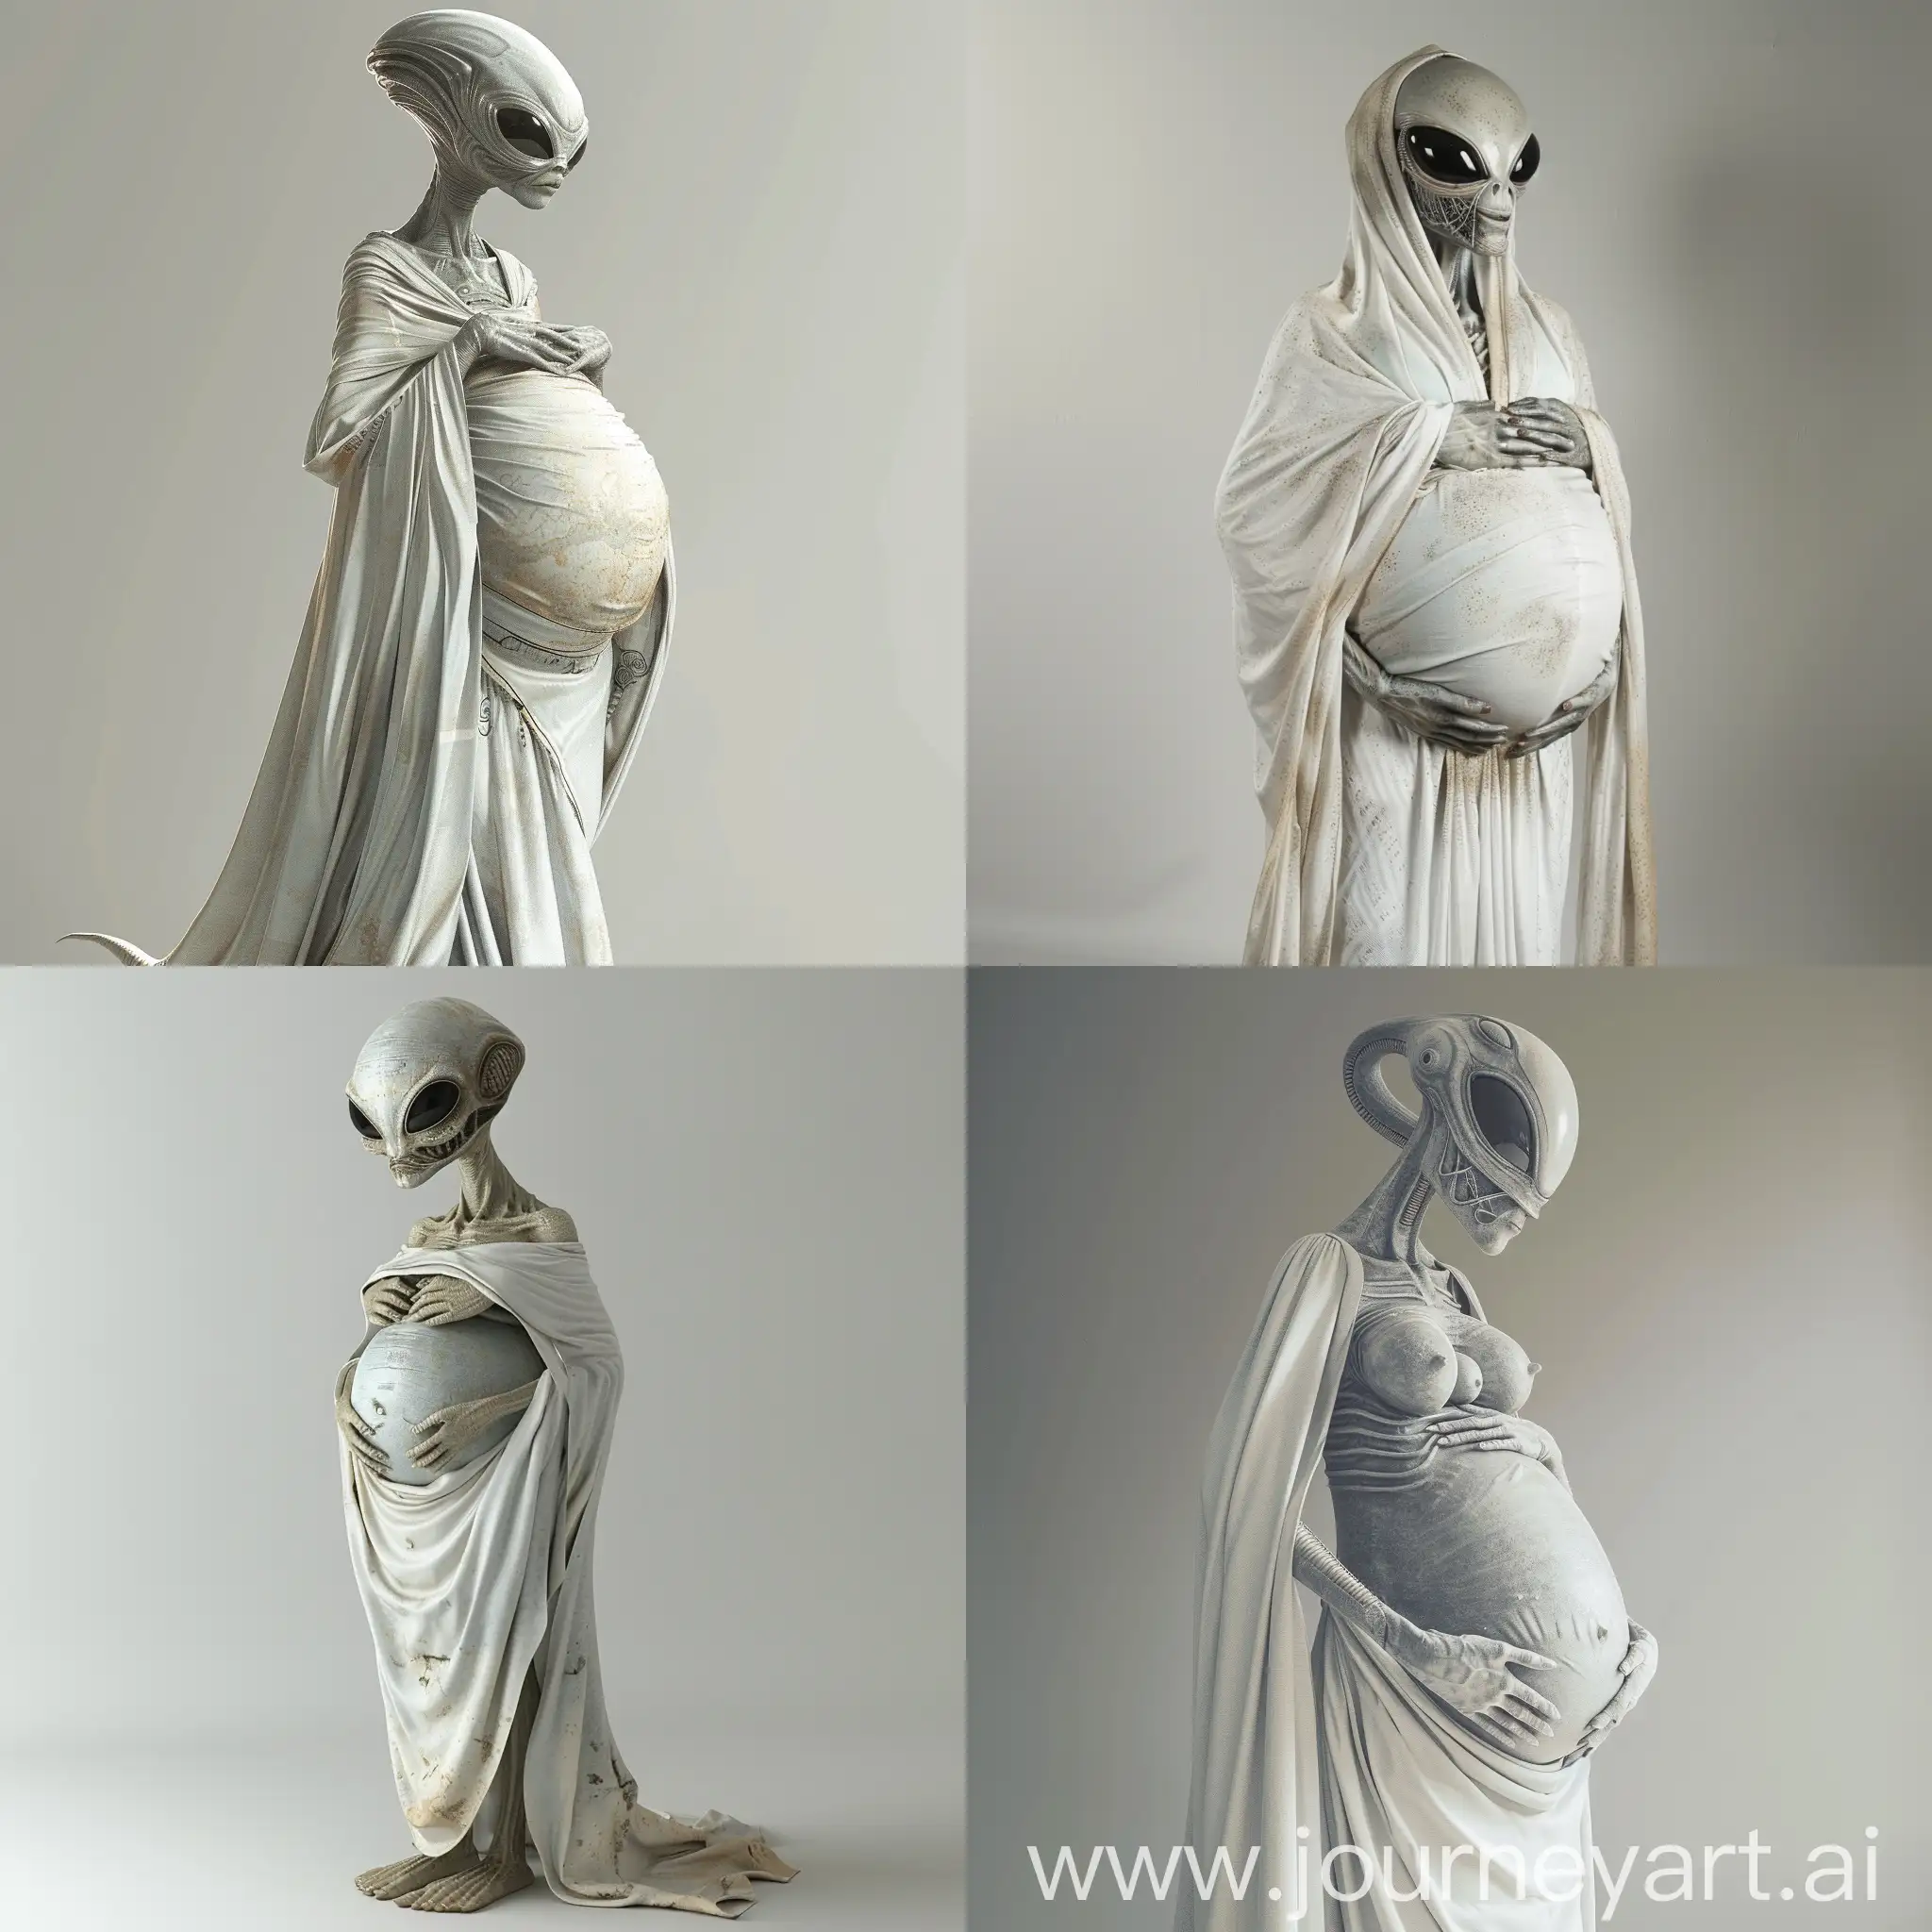 A very pregnant female gray Alien in a white toga, Her pregnant tummy is very large. The alien is pregnant with Twins.